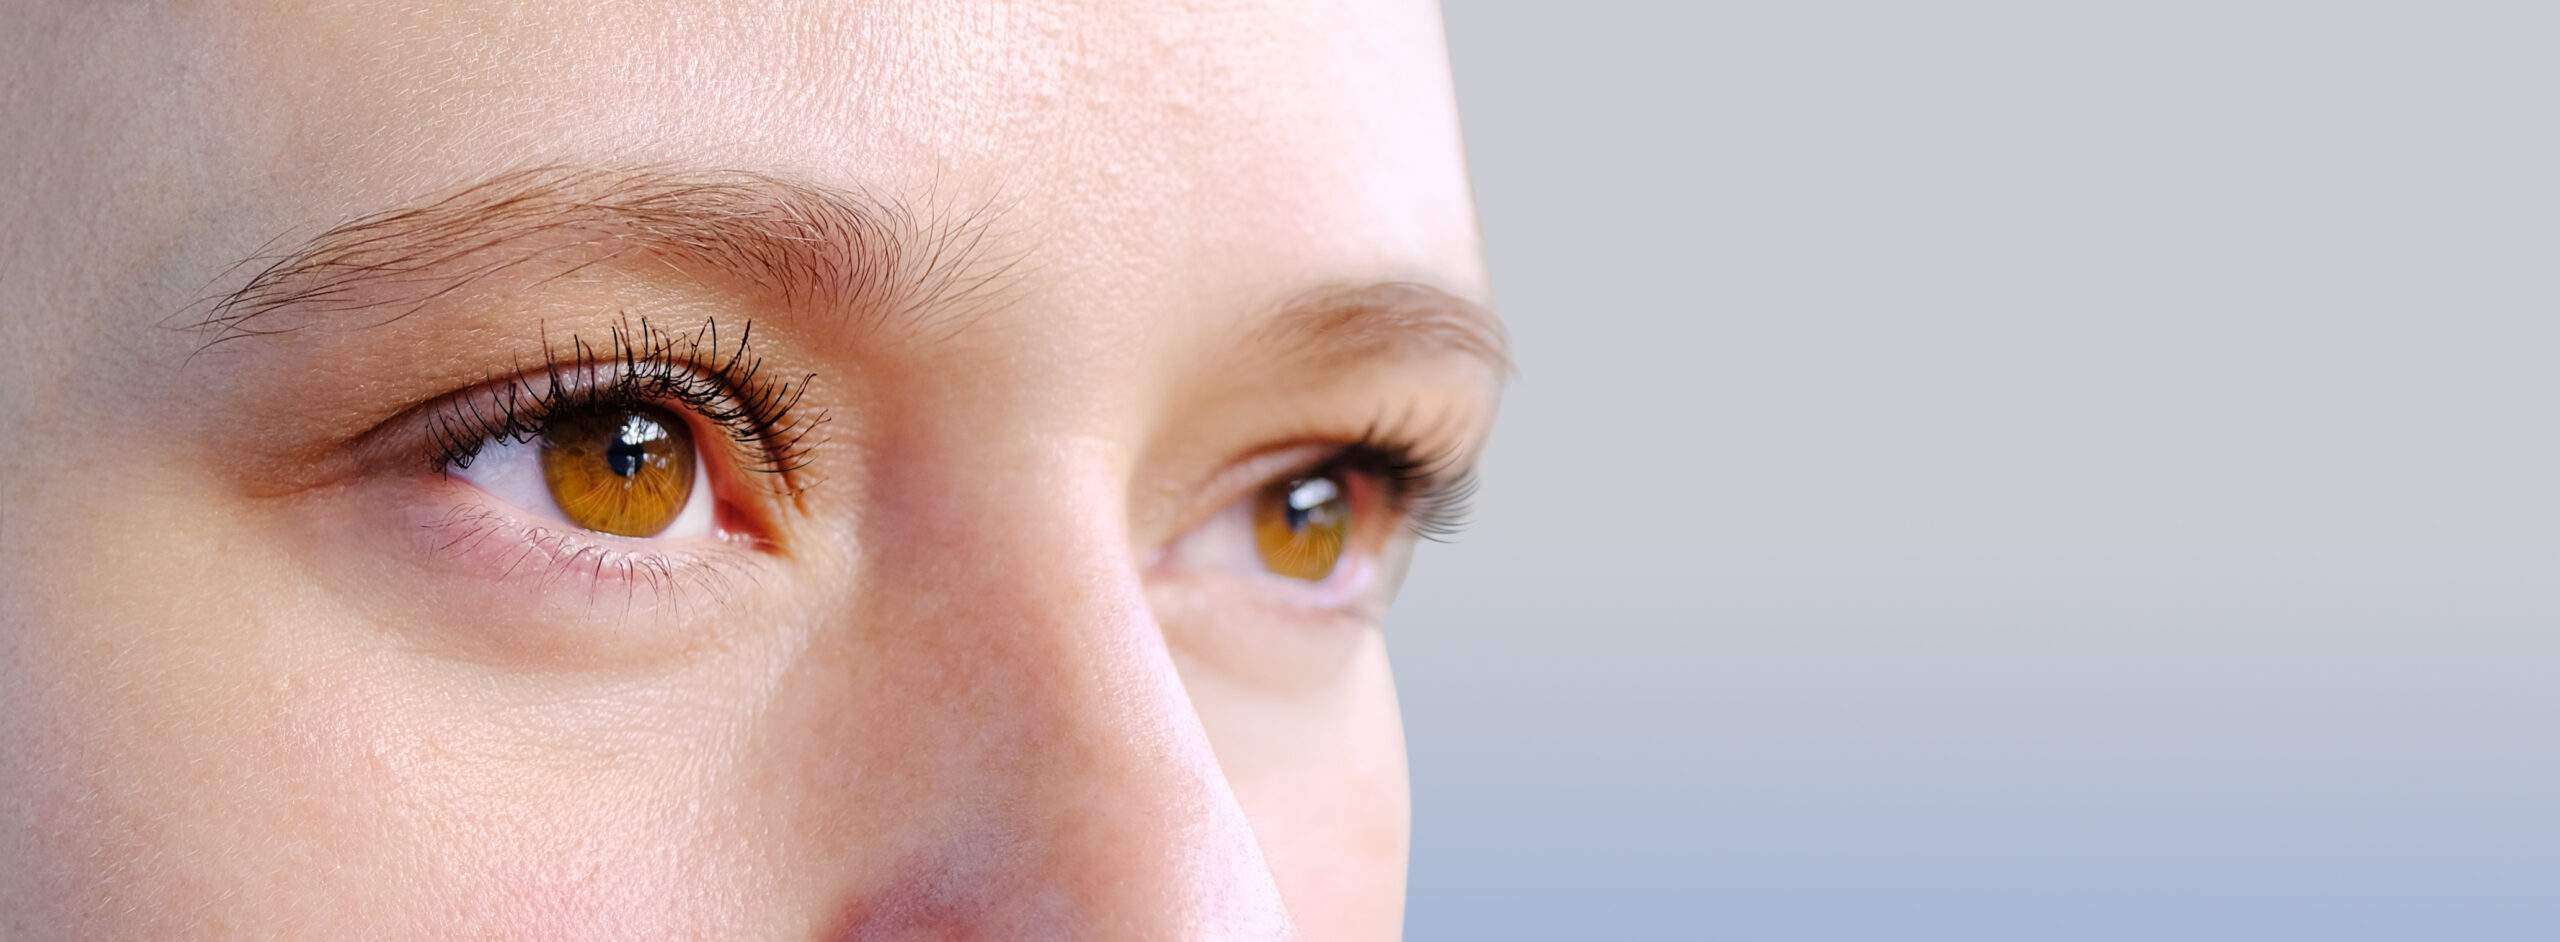 Which Drugs Cause Pinpoint Pupils?